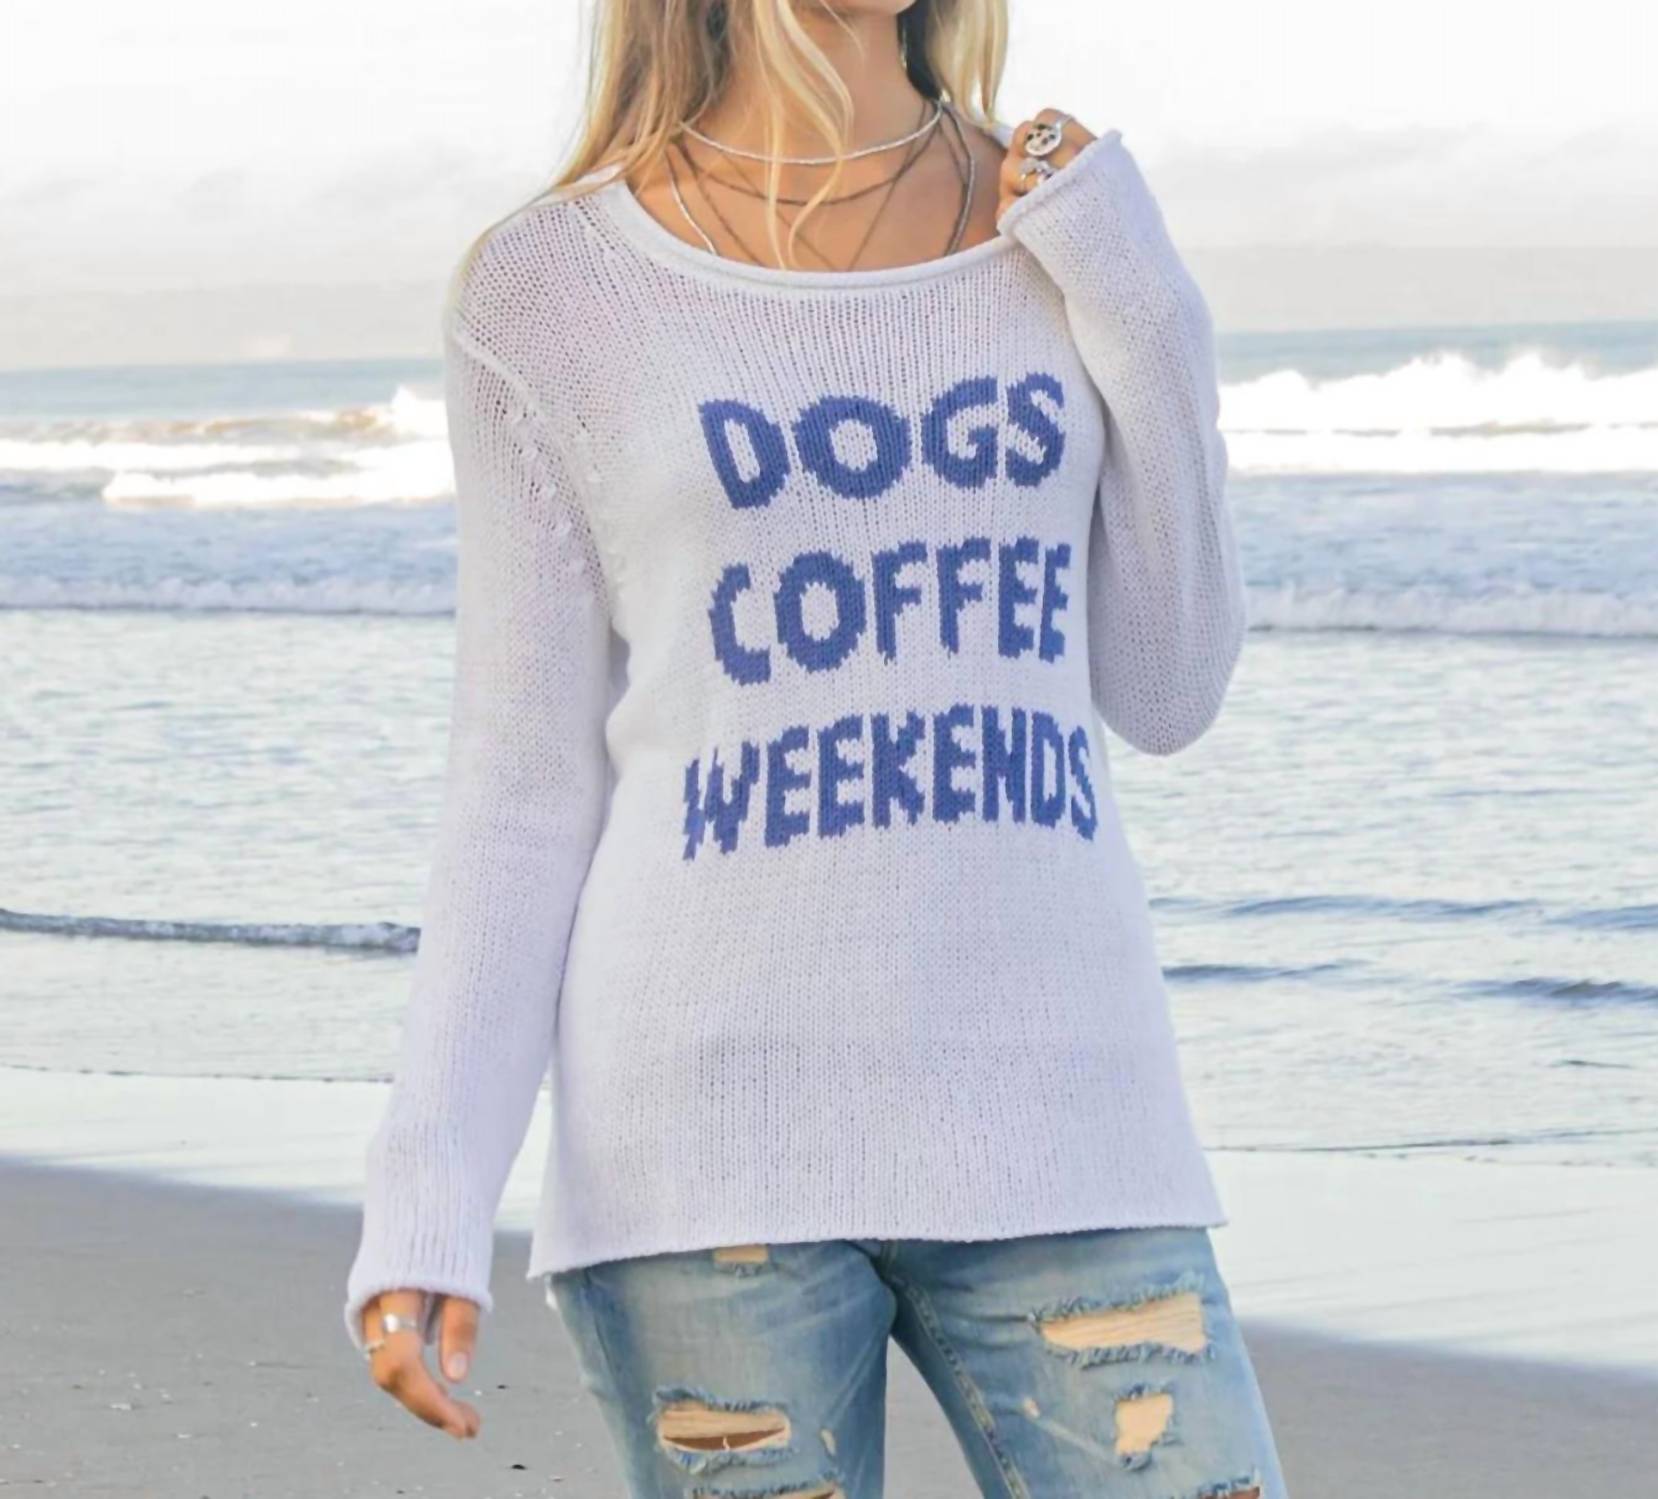 Dogs Coffee Weekends Cotton Crew Sweater